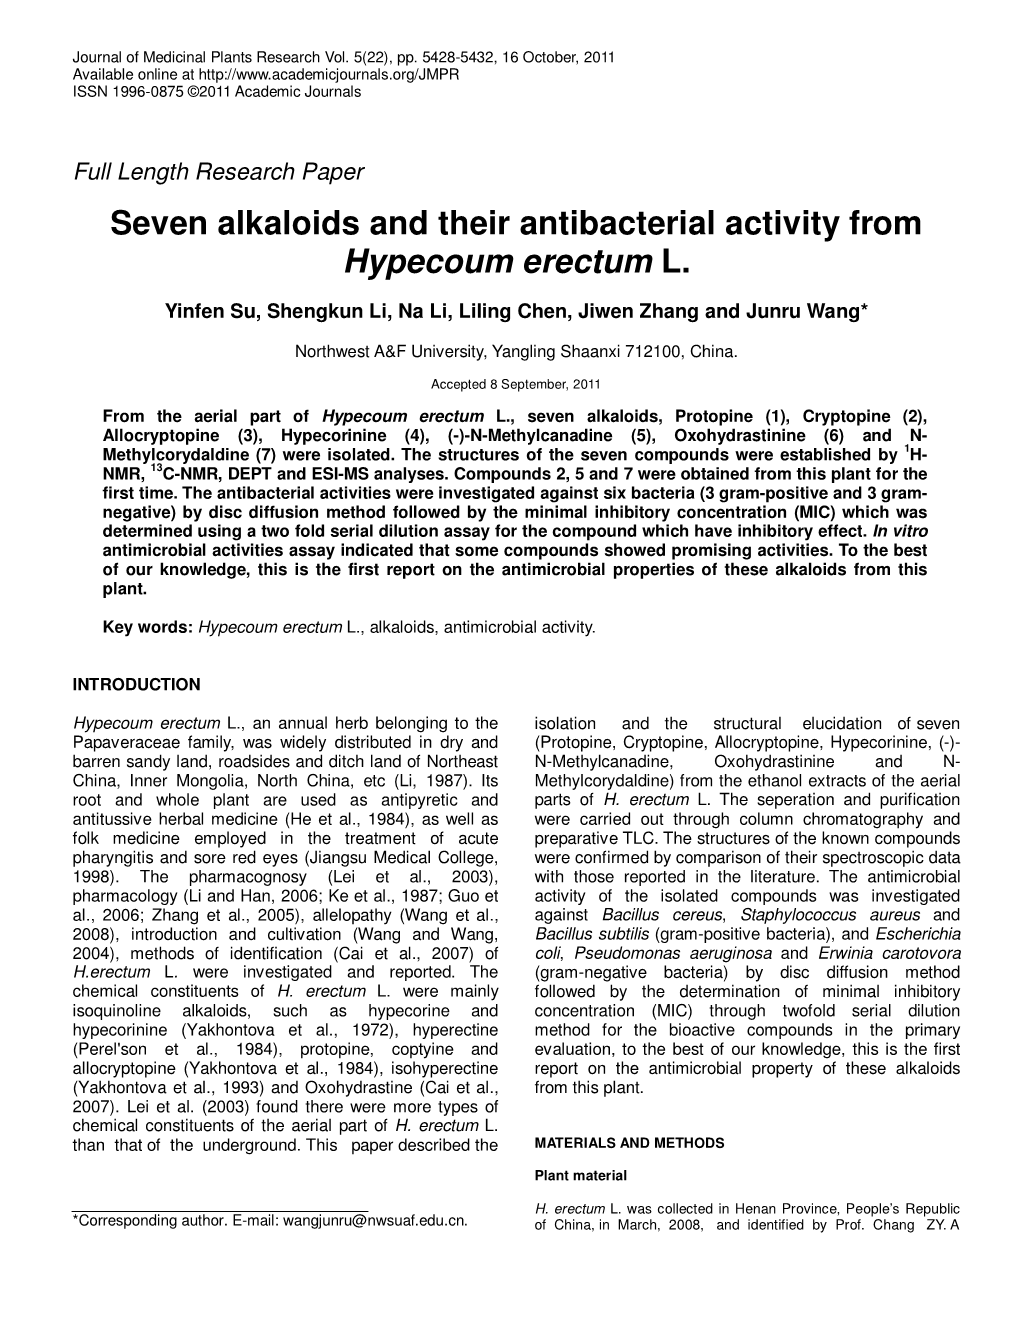 Seven Alkaloids and Their Antibacterial Activity from Hypecoum Erectum L